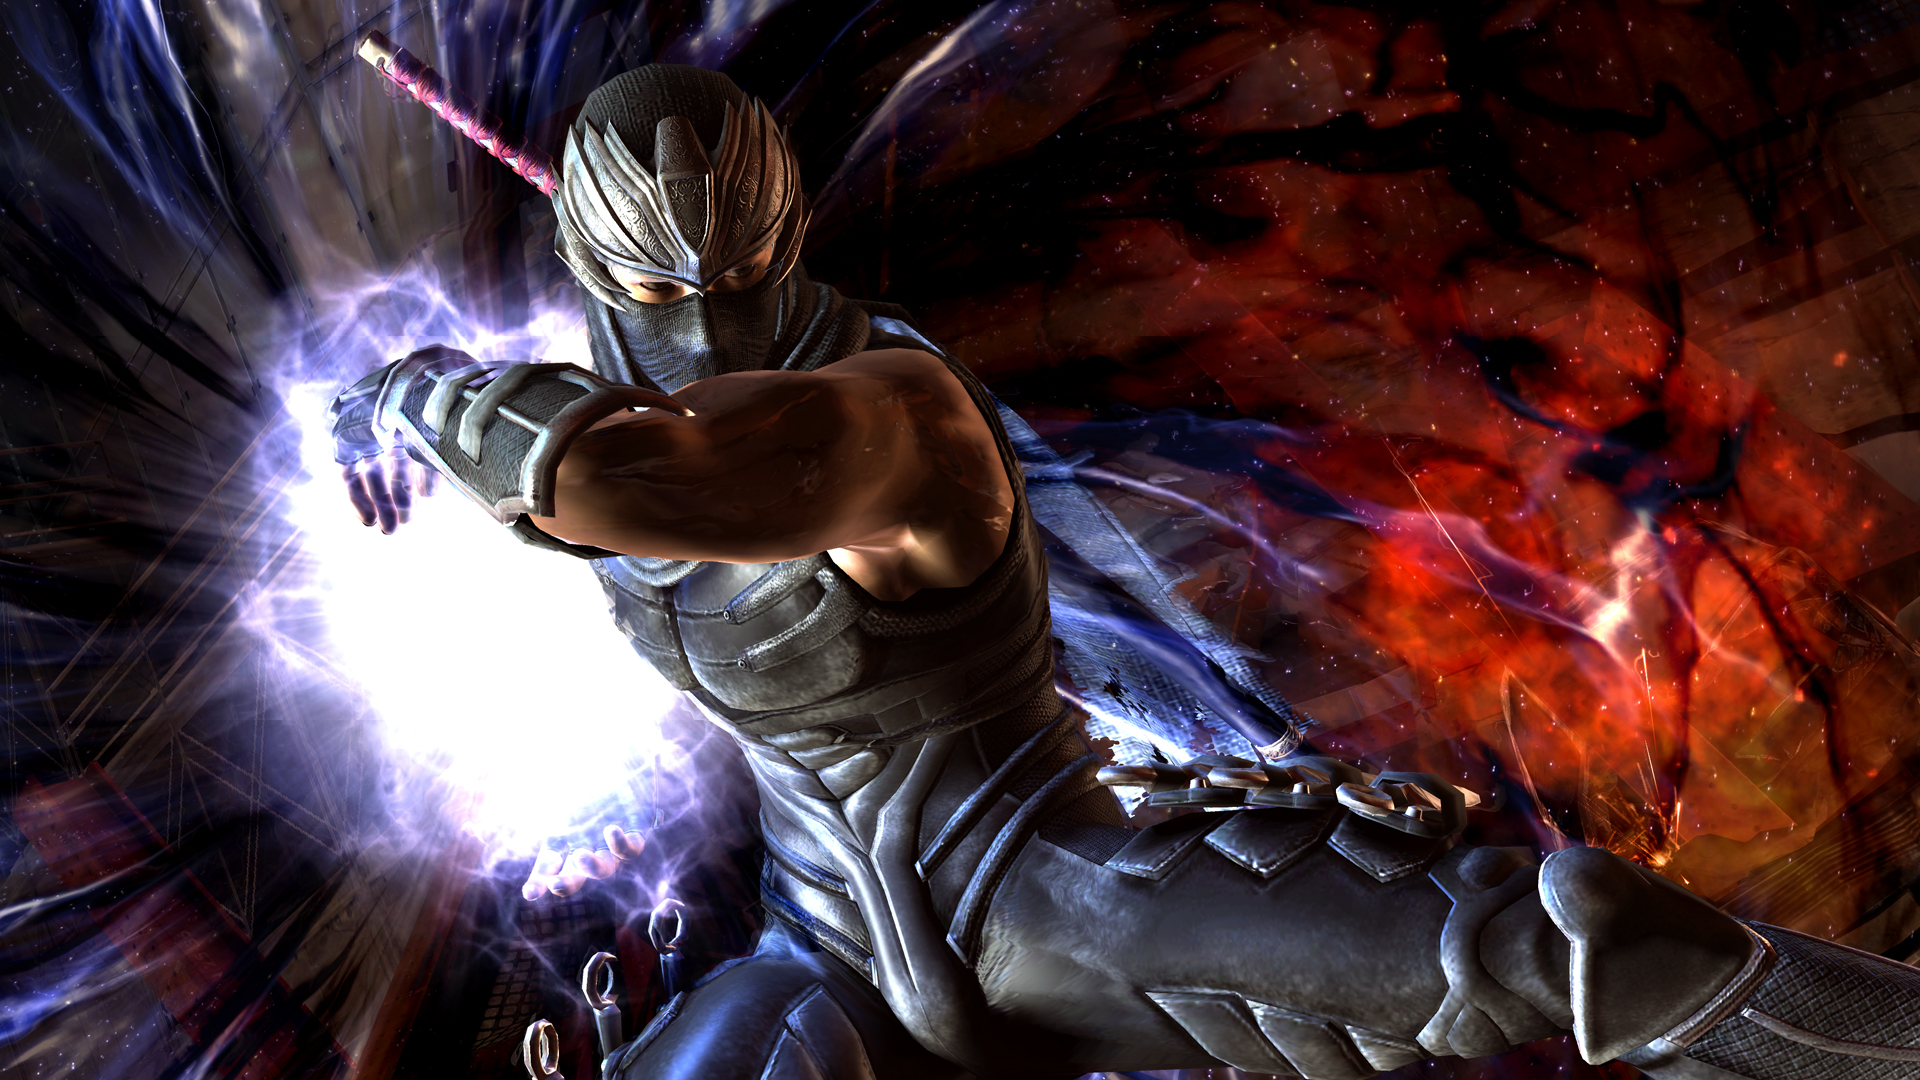 Dead Or Alive 5 Ryu Hayabusa , HD Wallpaper & Backgrounds